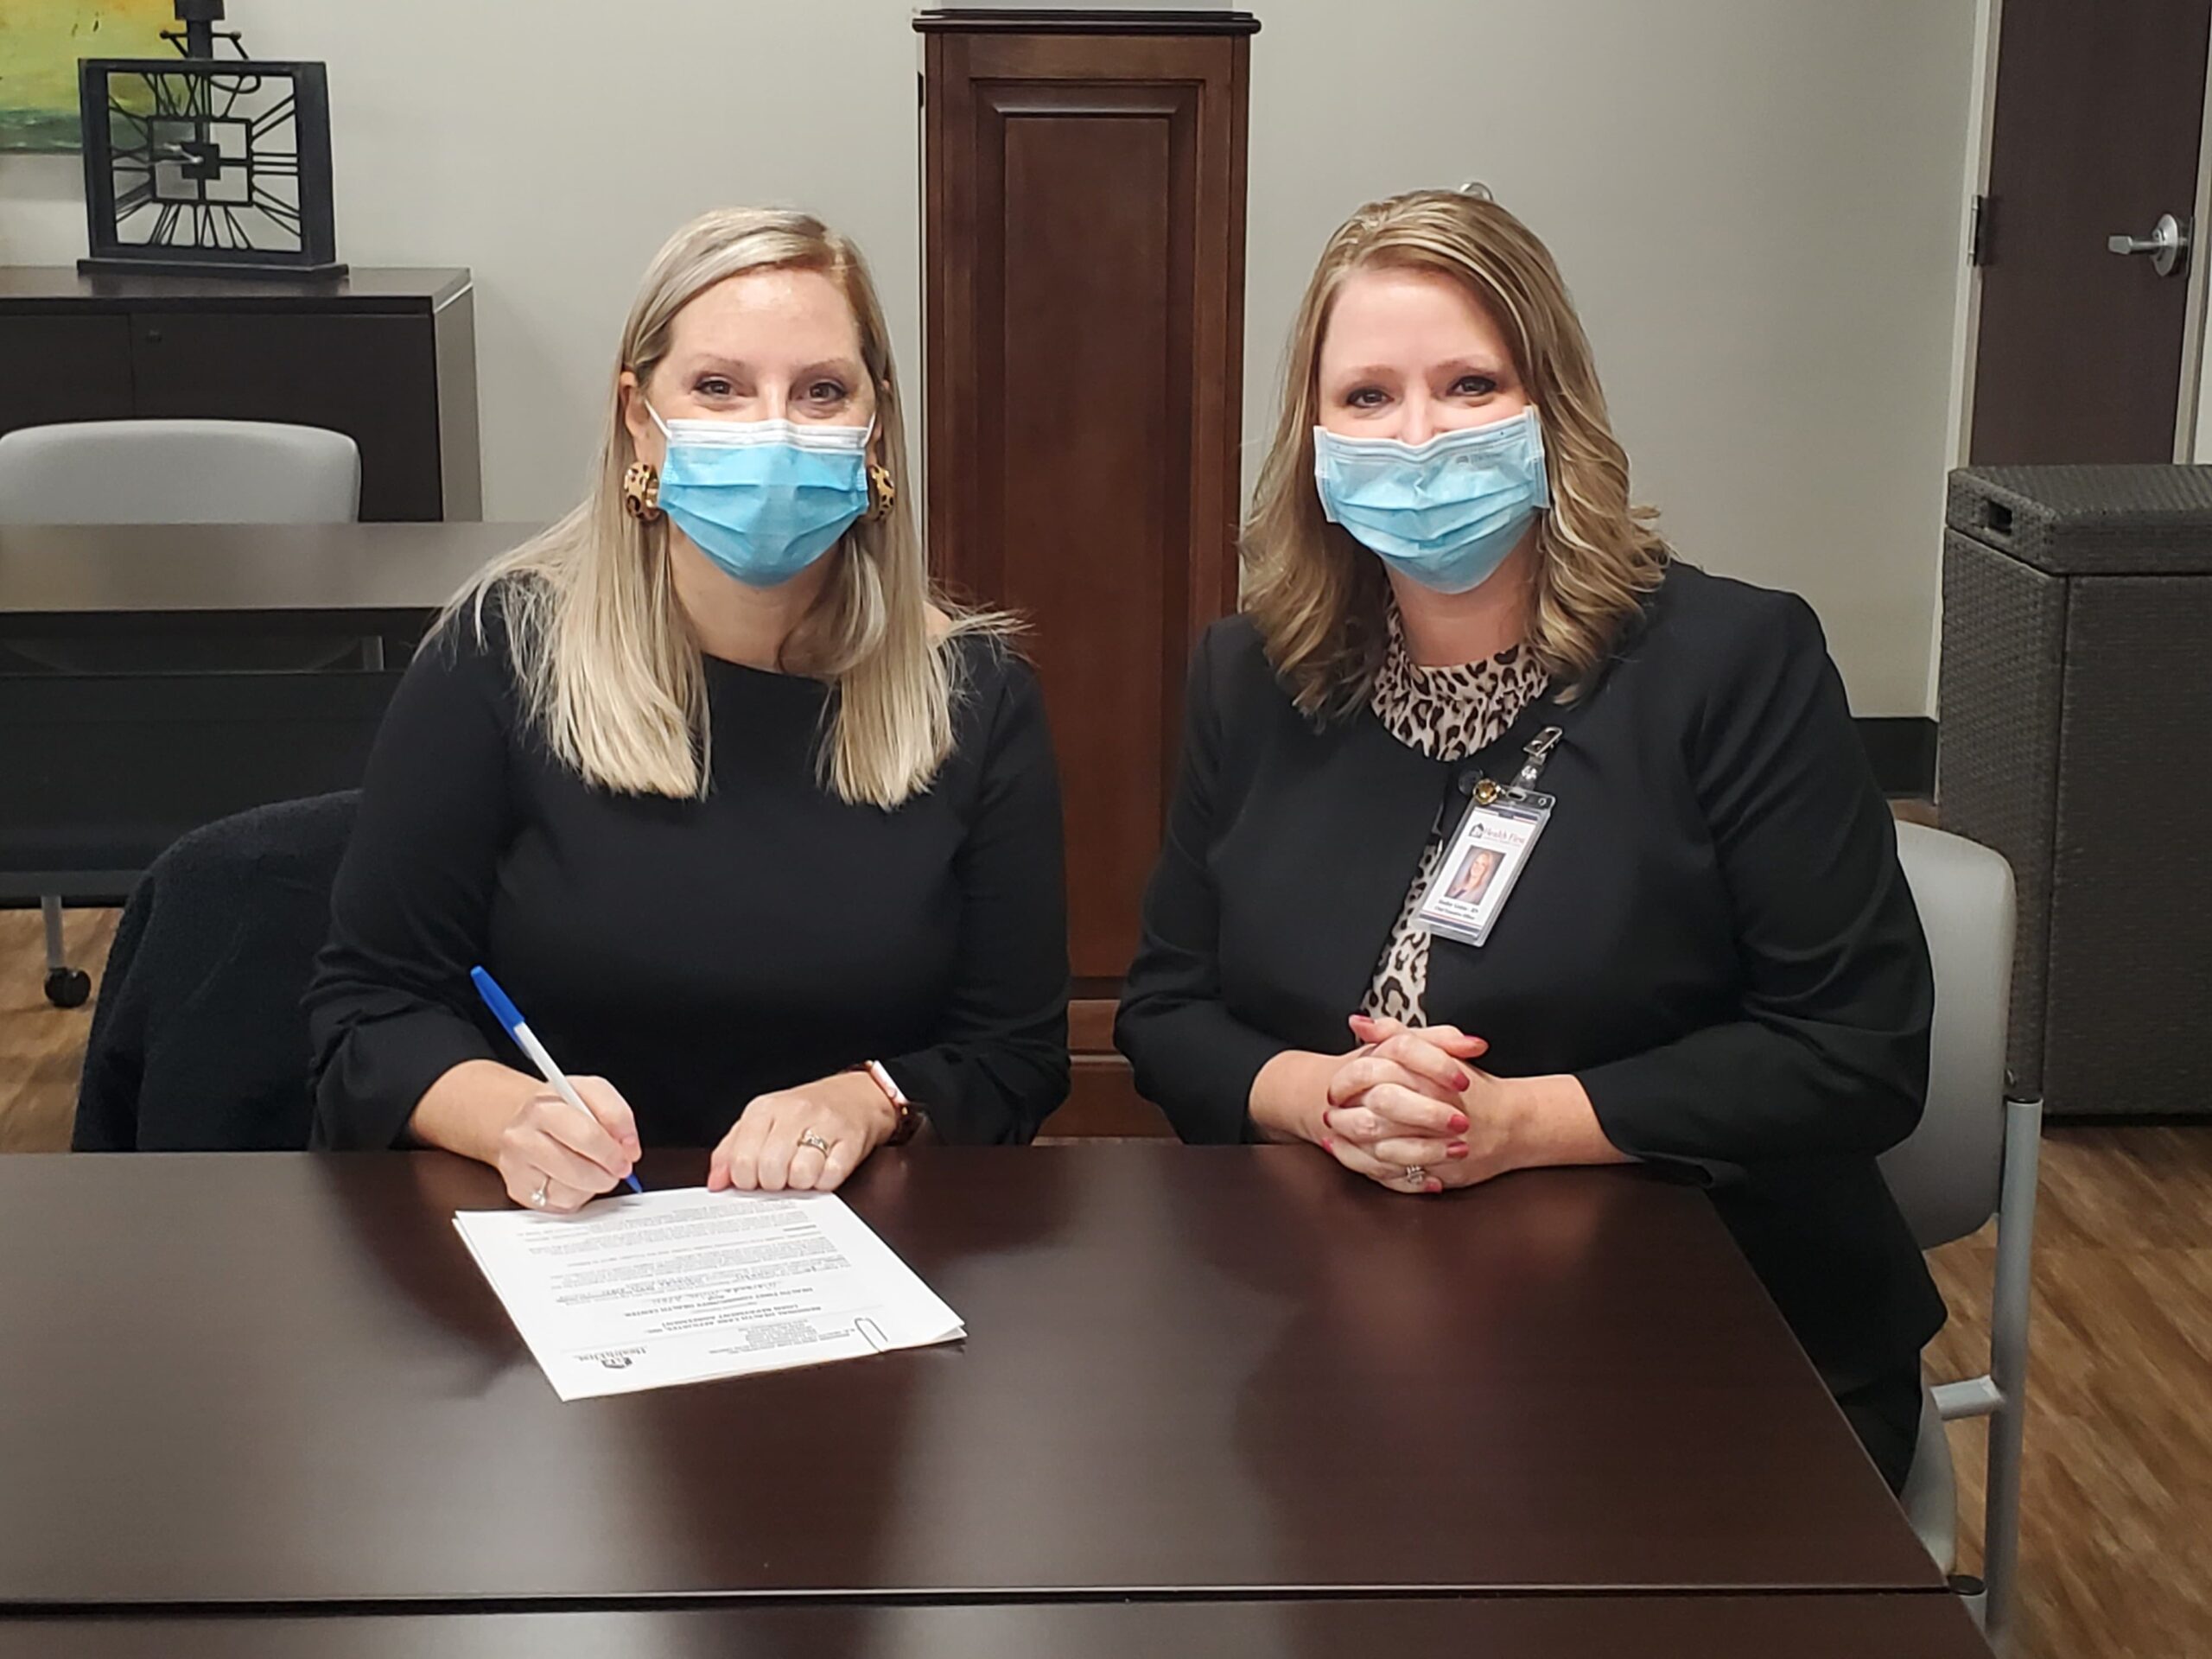 Two women wearing a face mask while sitting at a desk